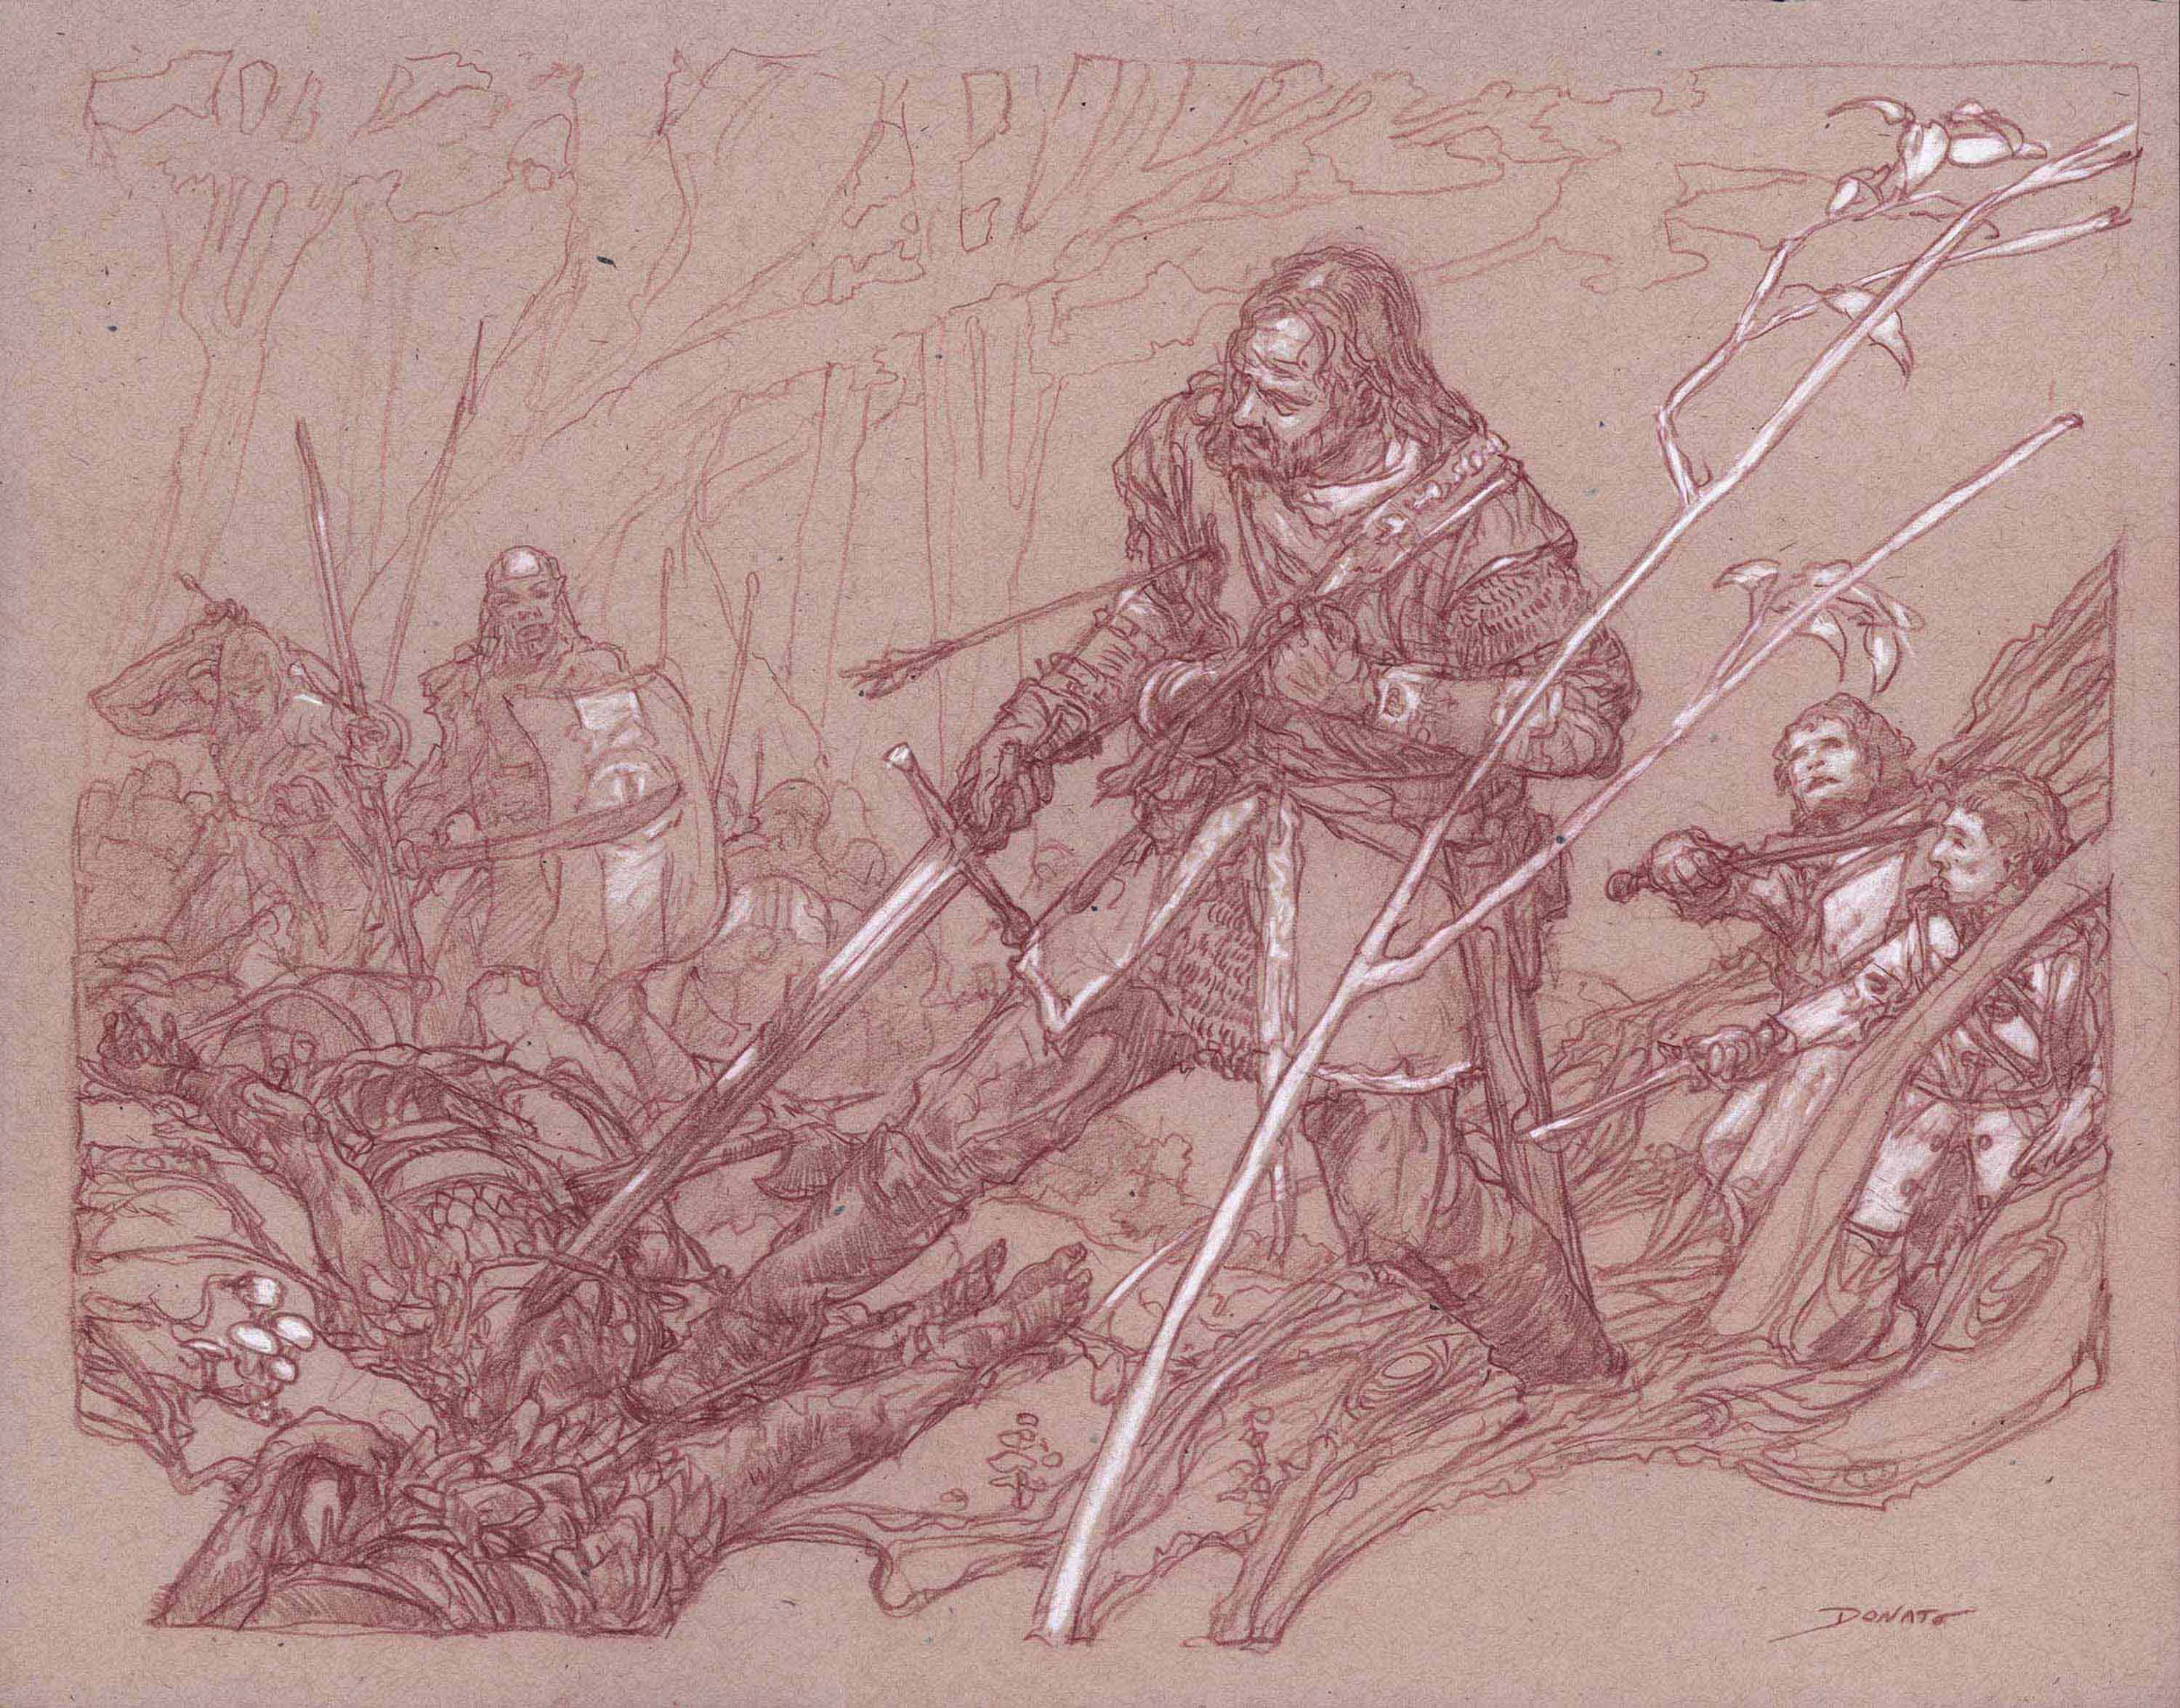 Guard them in the least
11" x14"  Watercolor Pencil and Chalk on Toned paper 2014
collection of Chris Redlich